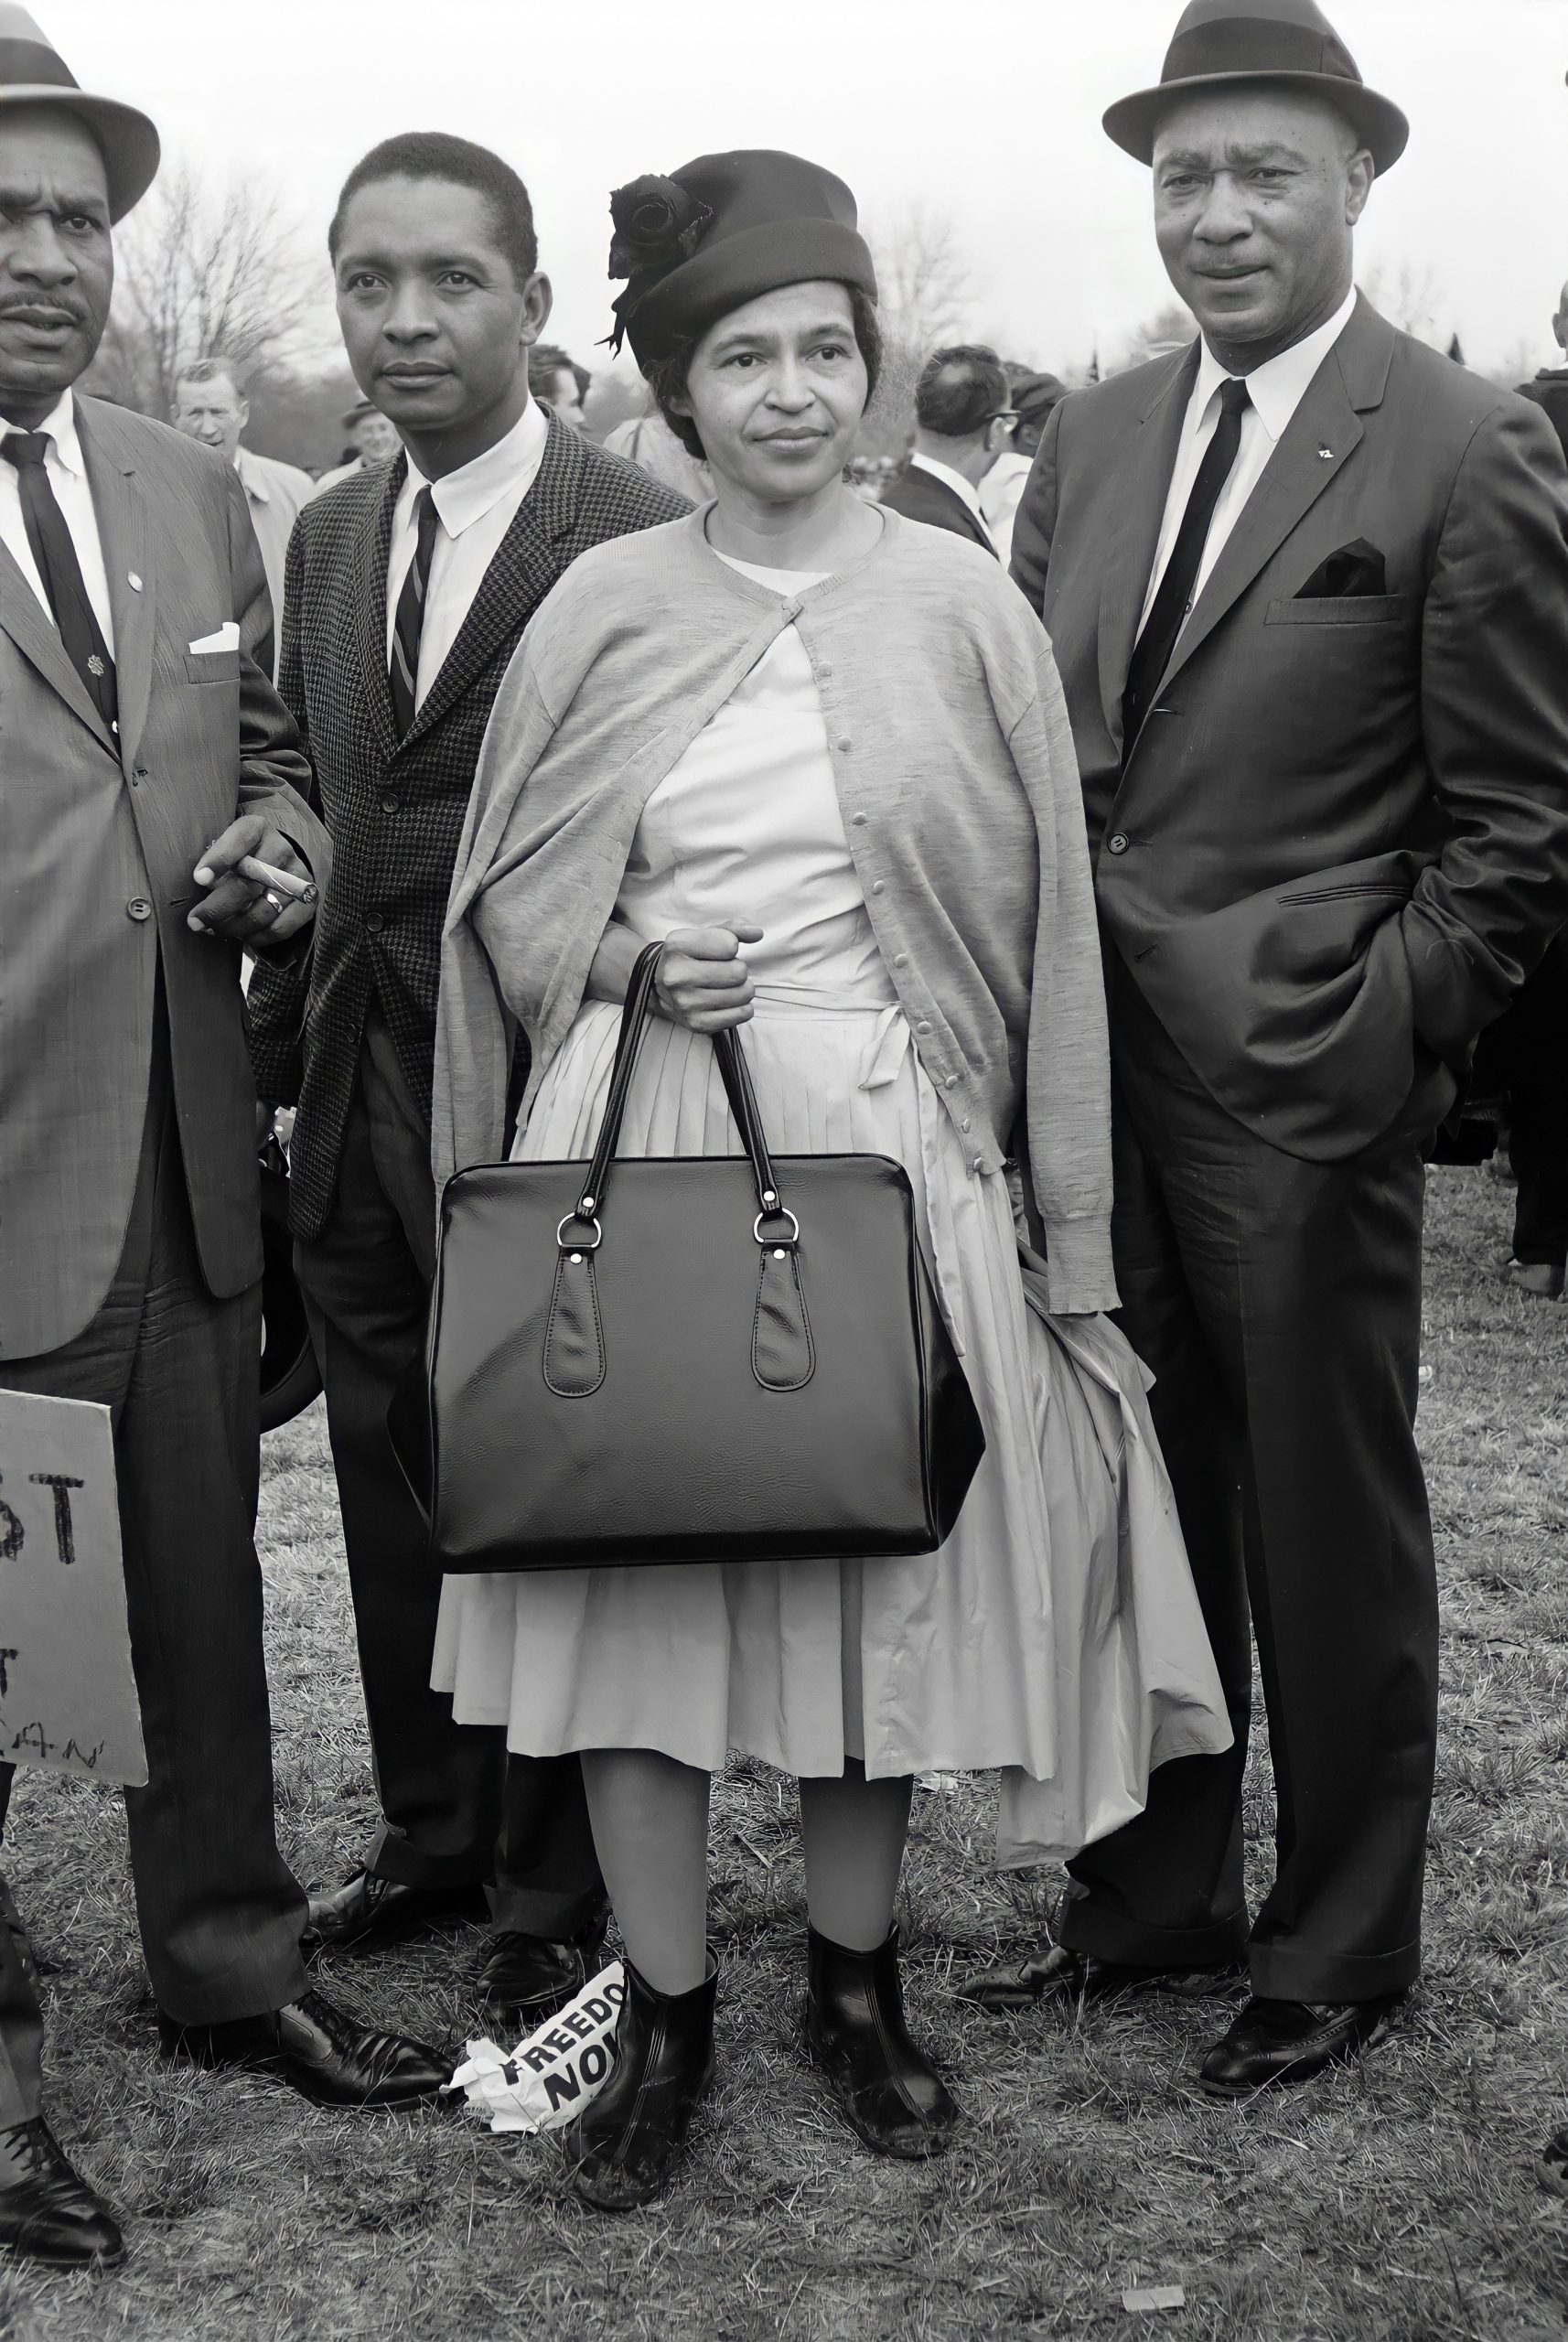 rosa parks biography accomplishments quotes family